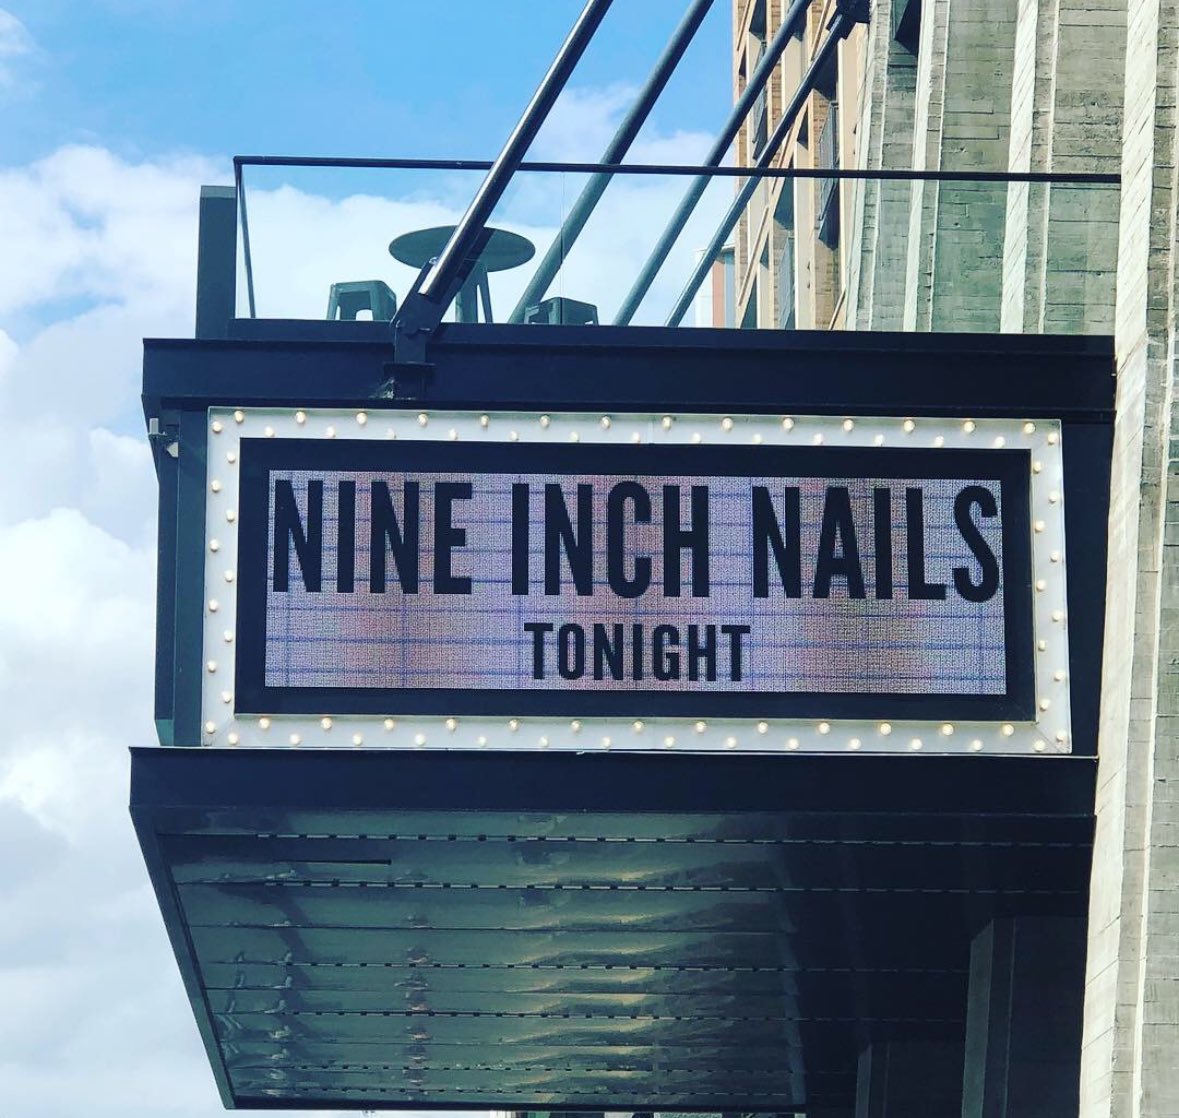 going to Washington to see NIN together was an all-timer, but so many  of his hangouts always became An Event - cheddarbaecon, renting party buses, movie screenings, even this stupid site. we’re all worse off without him.